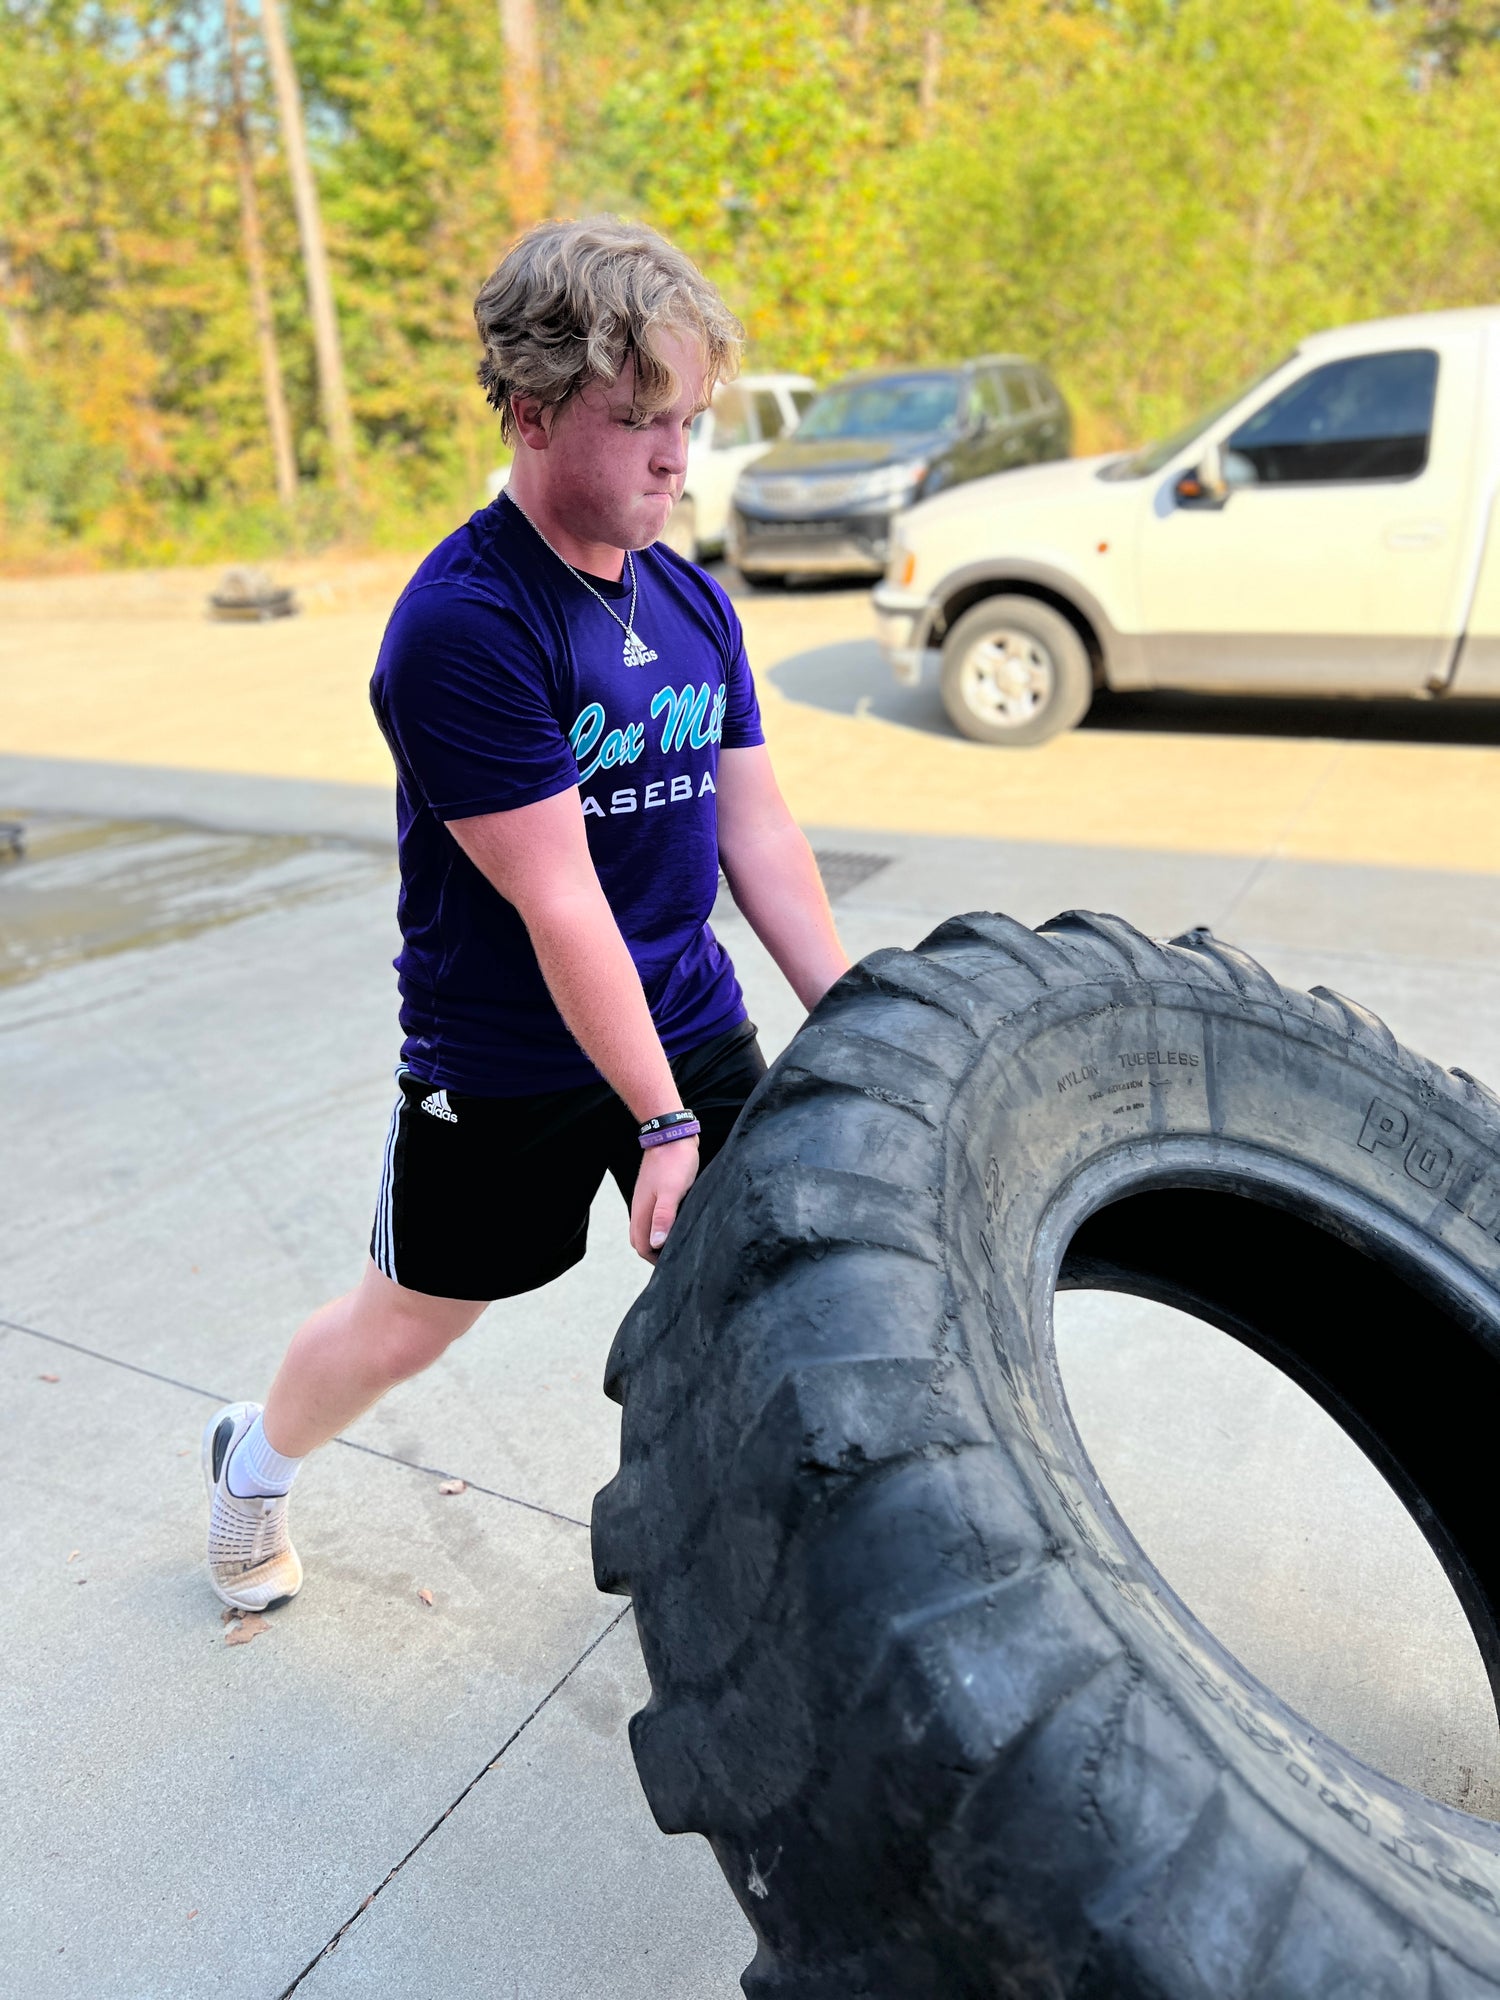 man lifting a tire for exercise